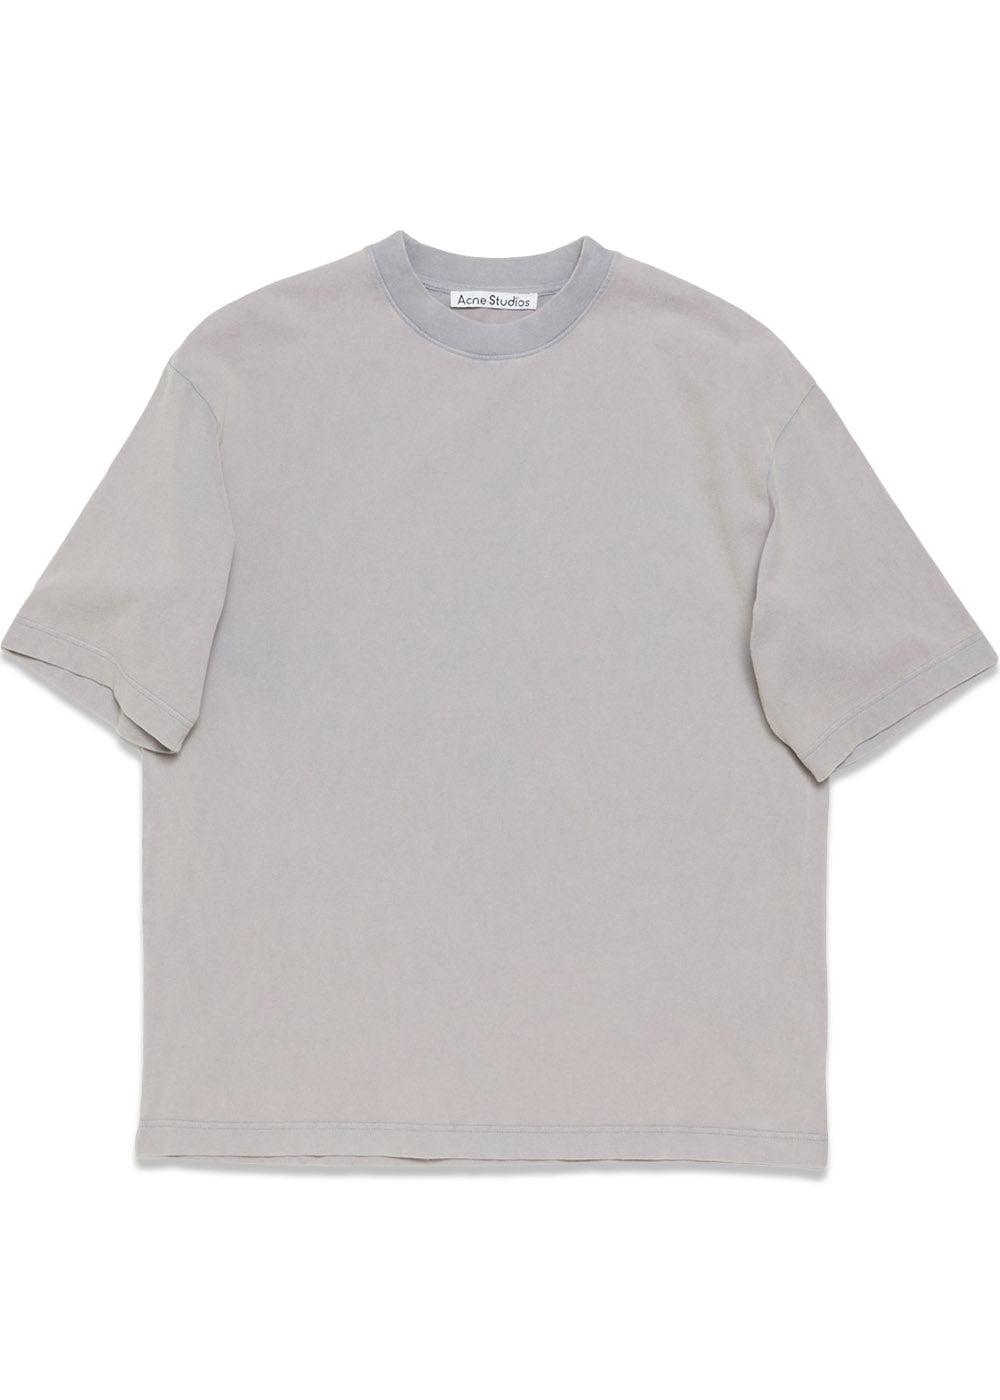 Crew neck tshirt relaxed unisex fit - Dusty Purple